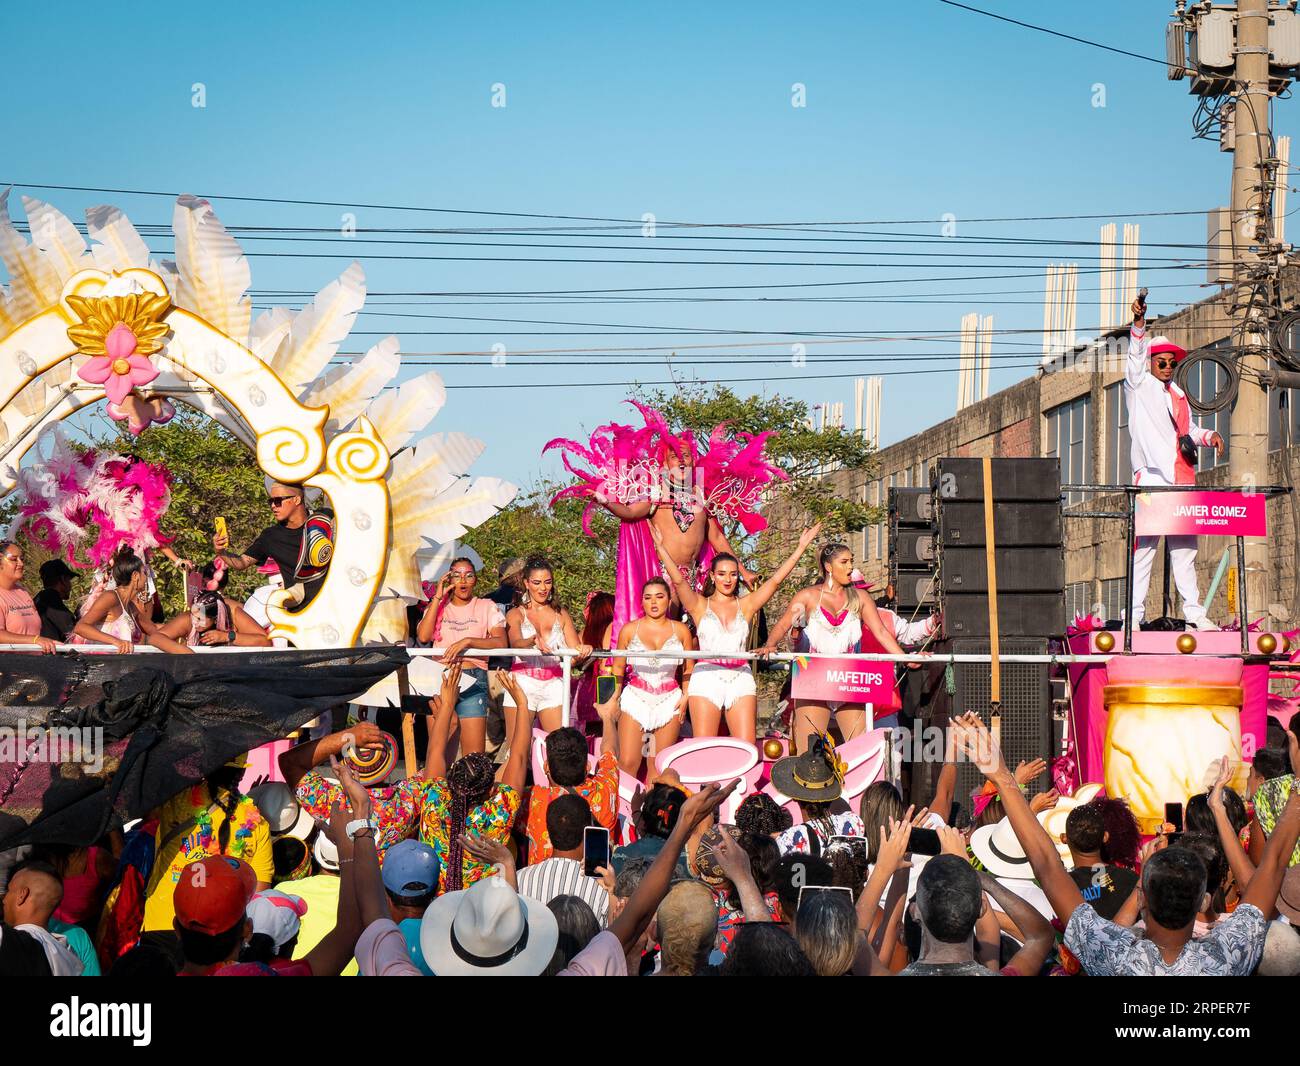 Barranquilla, Atlantico, Colombia - February 18 2023: Men and Women Dressed in White and Pink on a Float in the Carnival Parade Waving to the Crowd Stock Photo